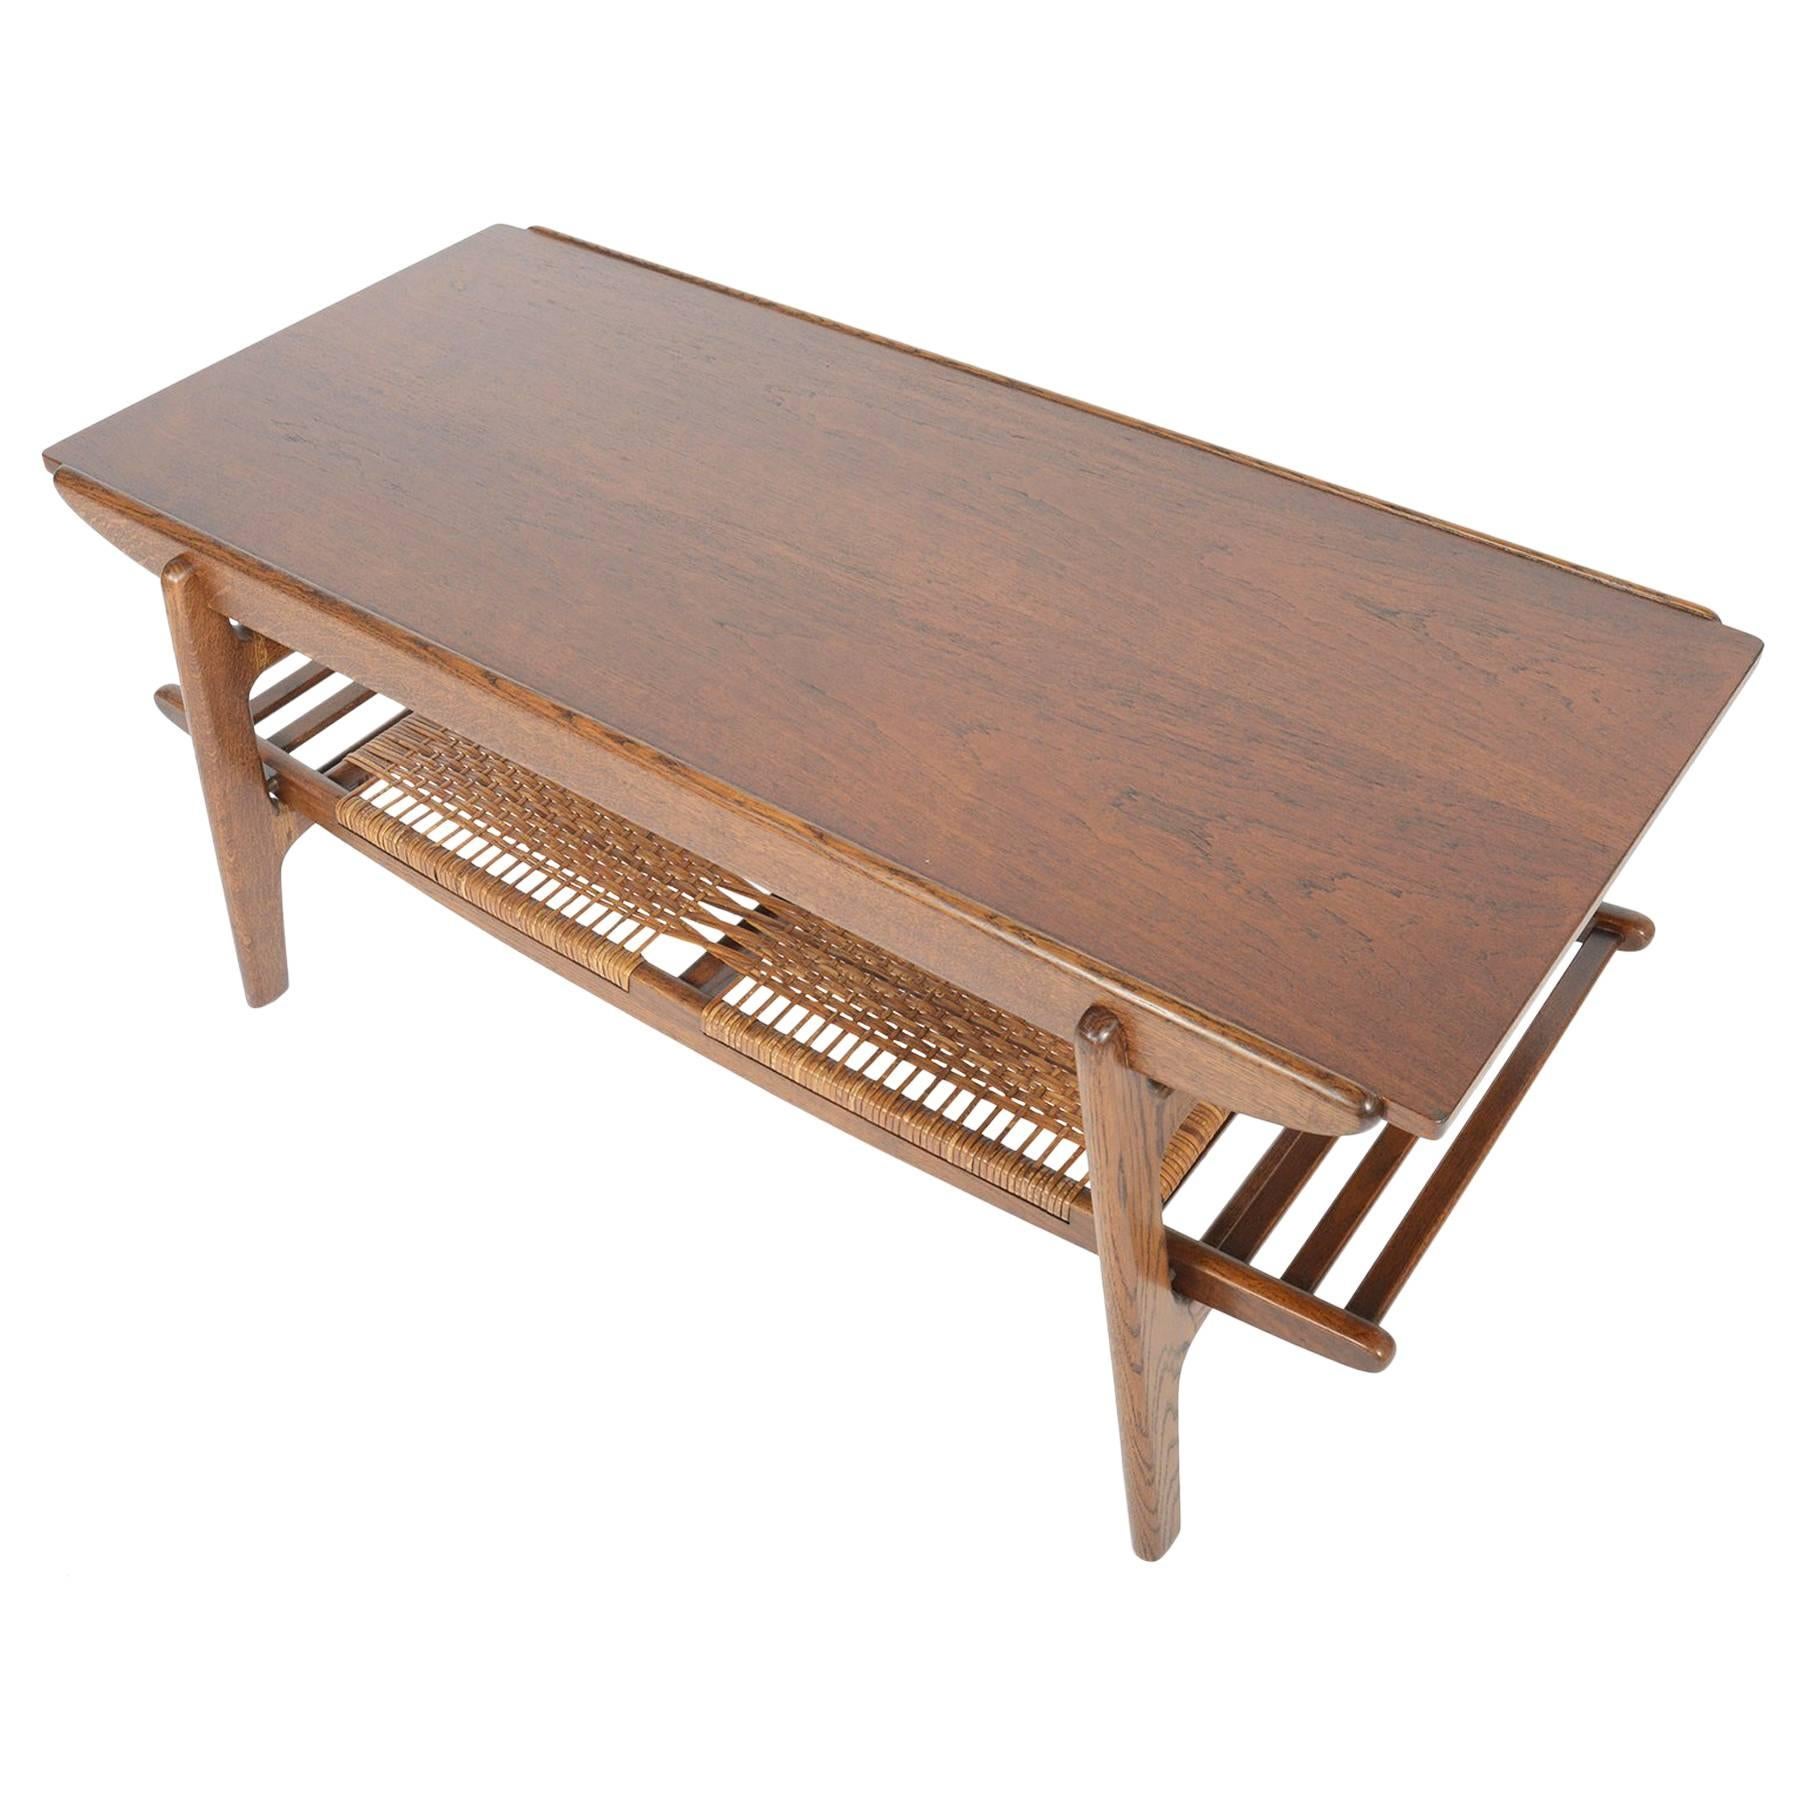 Large Teak and Oak Surfboard Coffee Table with Rack